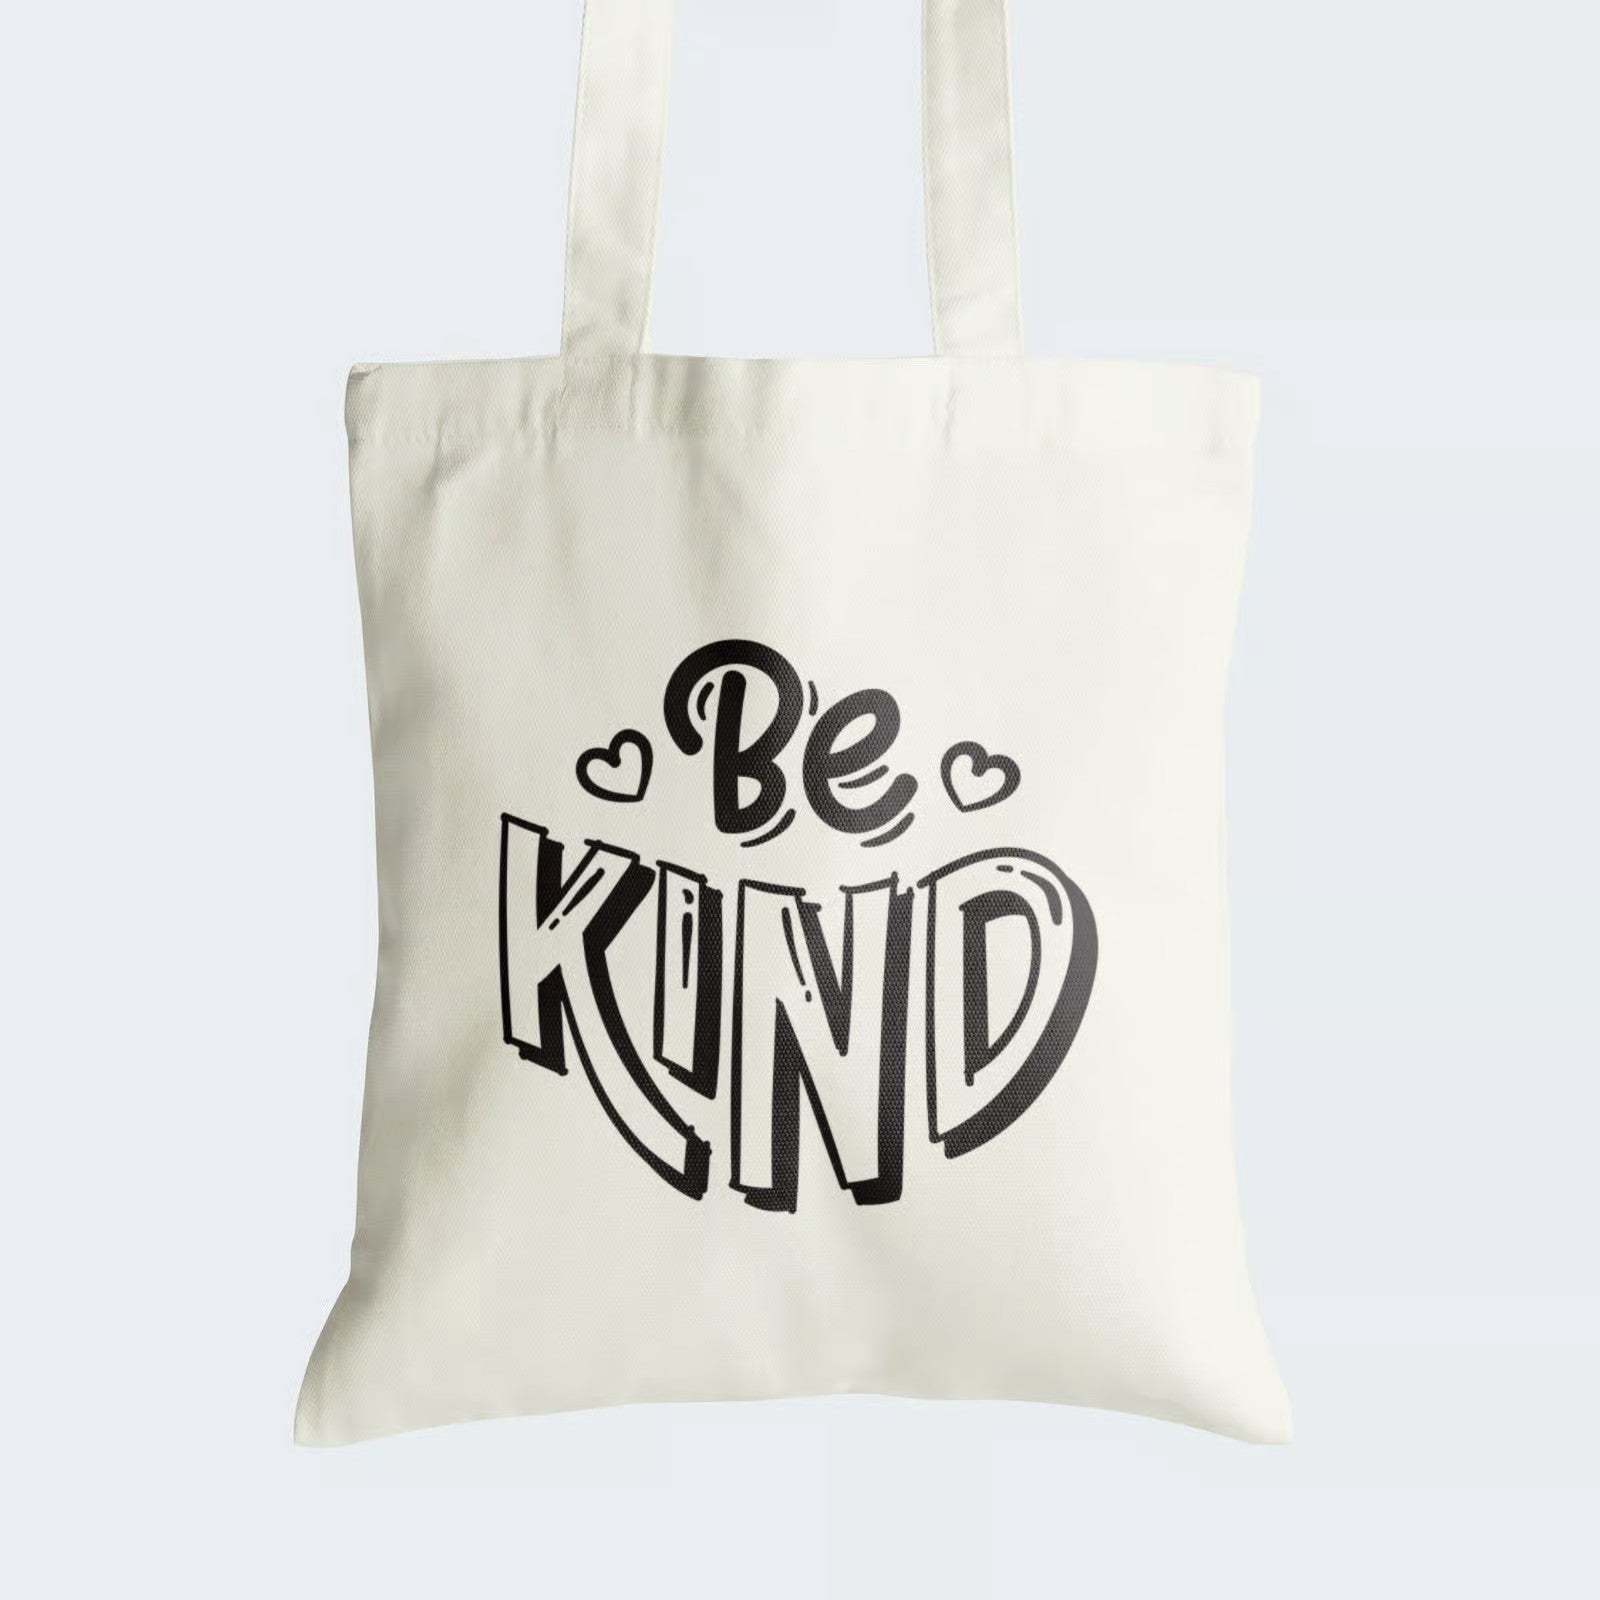 Elevate your style while promoting kindness with our "Be KIND" Cotton Canvas Tote Bag. This tote features bold black graphic text, reading "Be KIND," serving as a daily reminder to spread compassion and goodwill. Crafted for both durability and style, it includes a secure zipper closure for daily convenience. Make a statement and inspire positive change with our "Be KIND" Cotton Canvas Tote Bag. Order yours today and carry kindness with you wherever you go!